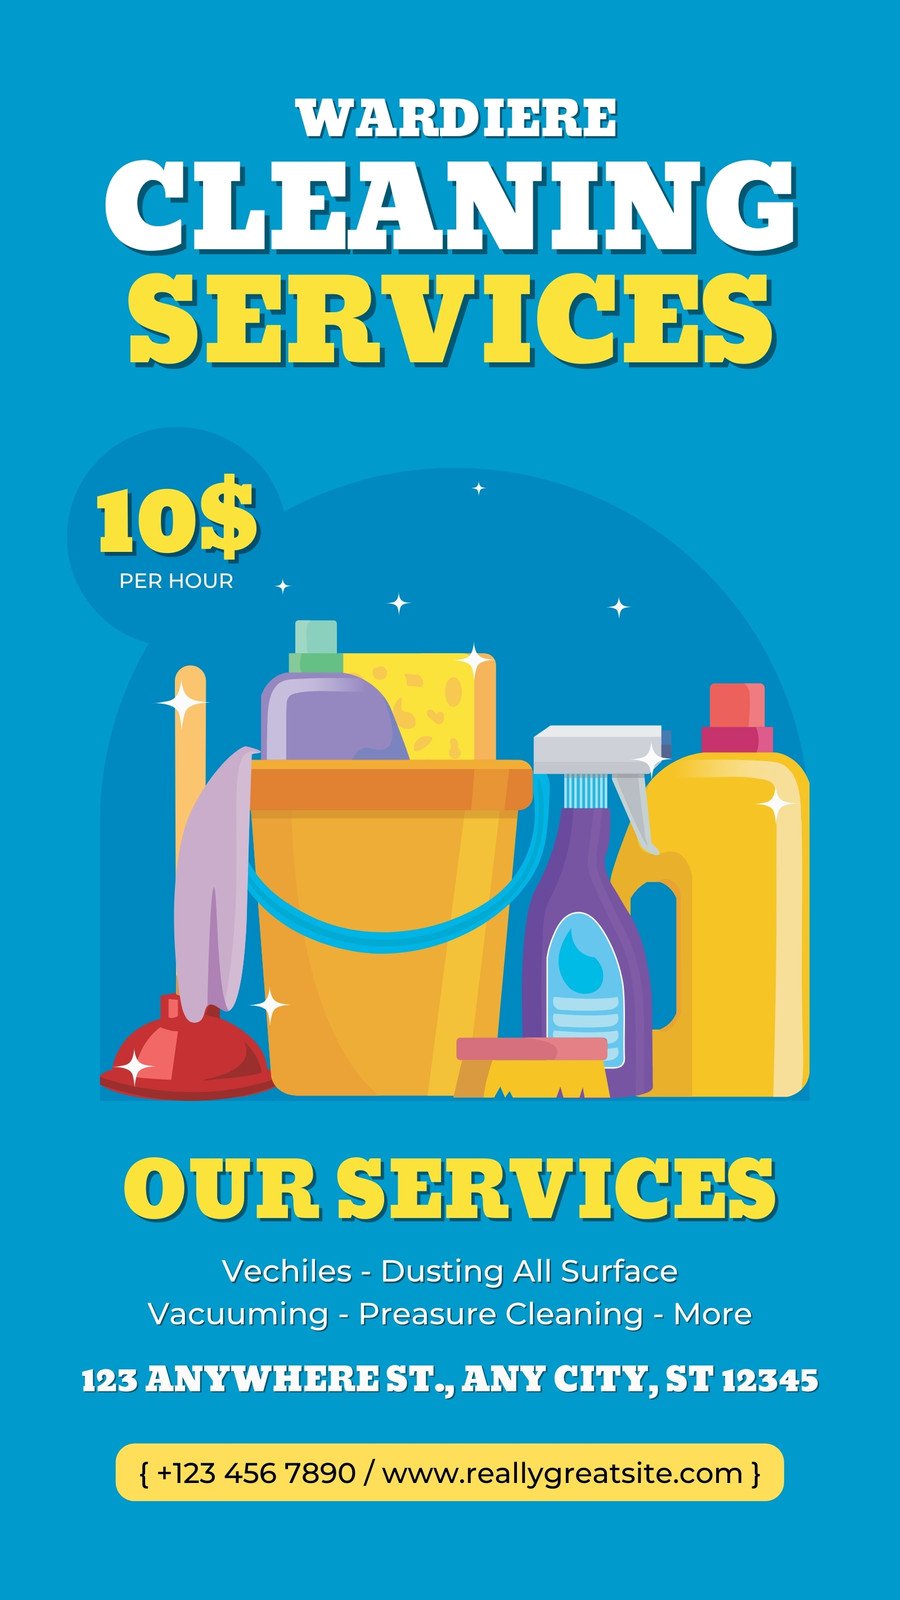 Free samples of cleaning merchandise